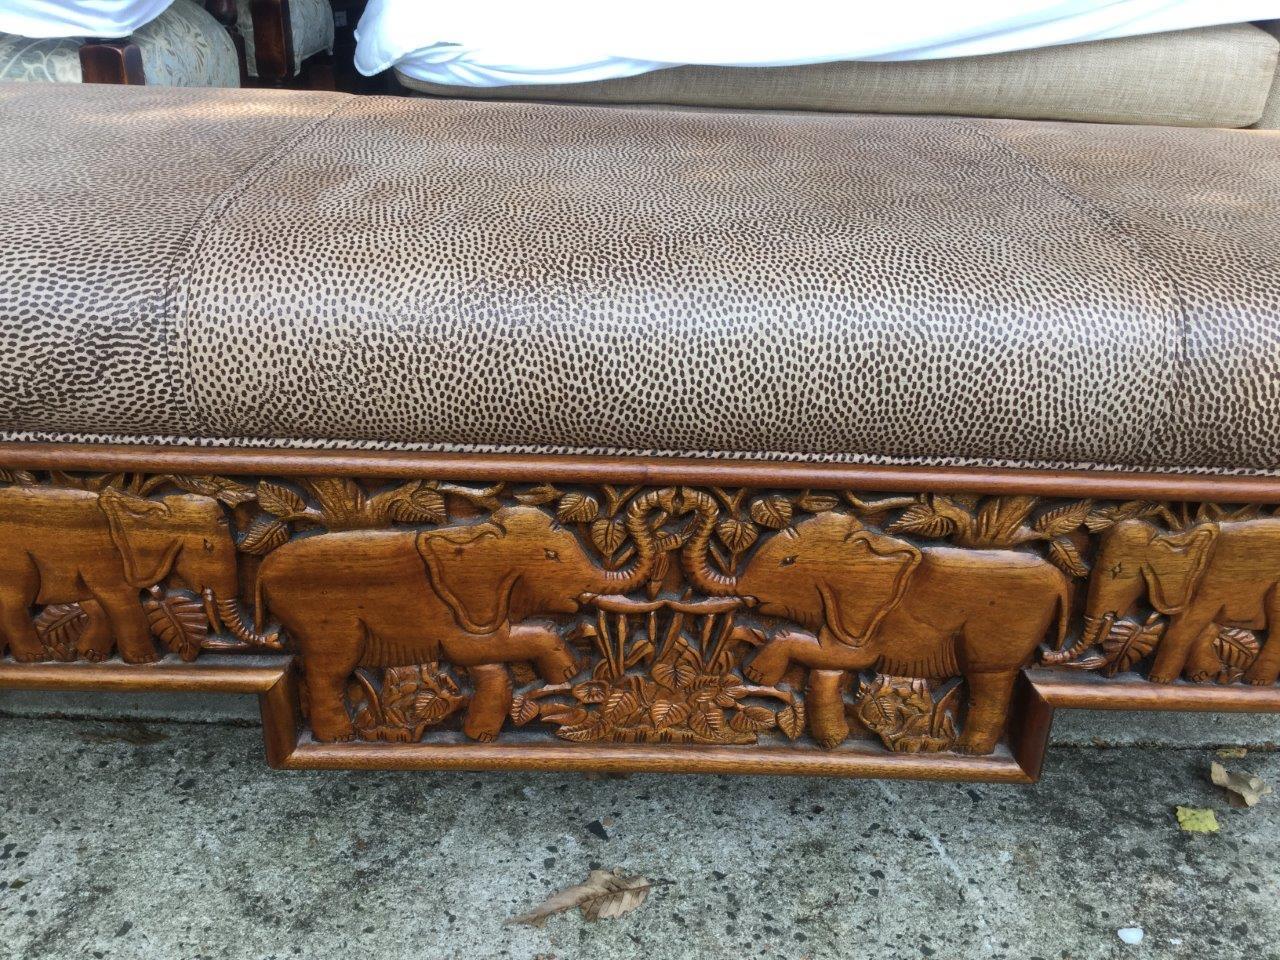 Late 20th Century Distinguished Vintage Carved Wooden Bench with Animal Print Leather Upholstery